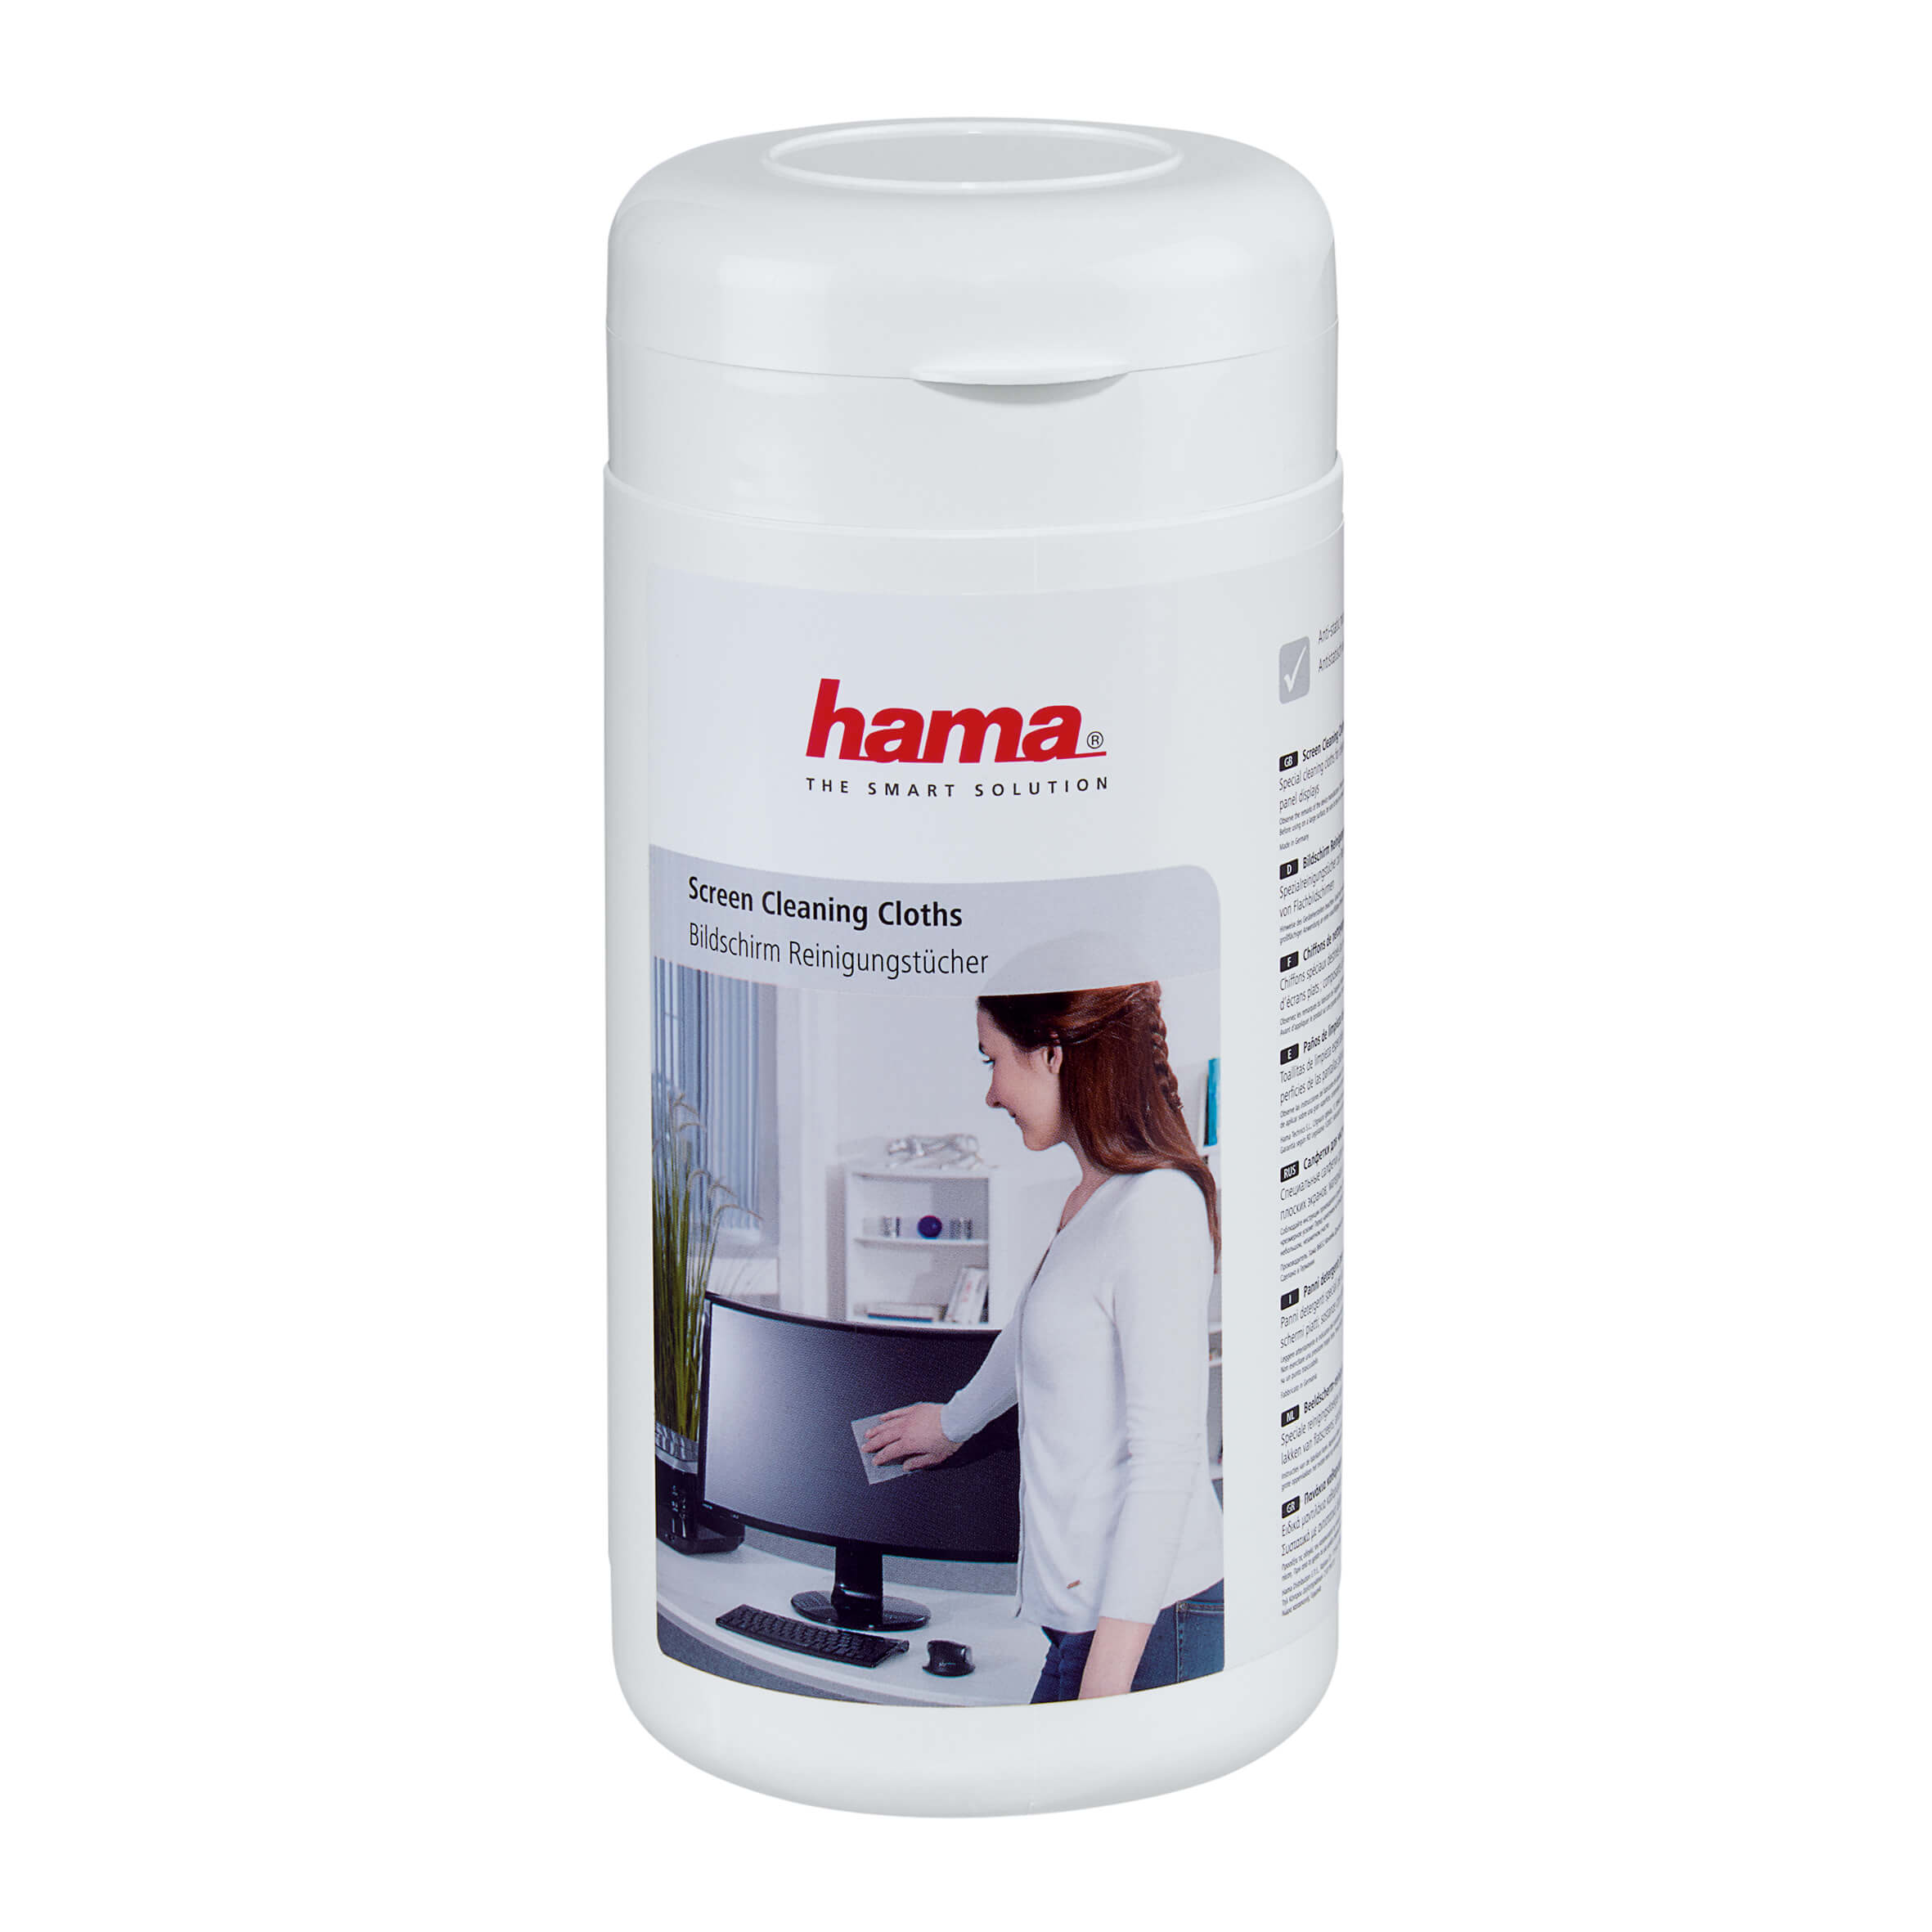 HAMA Screen Cleaning Cloths, 100 p ieces, in a dispenser